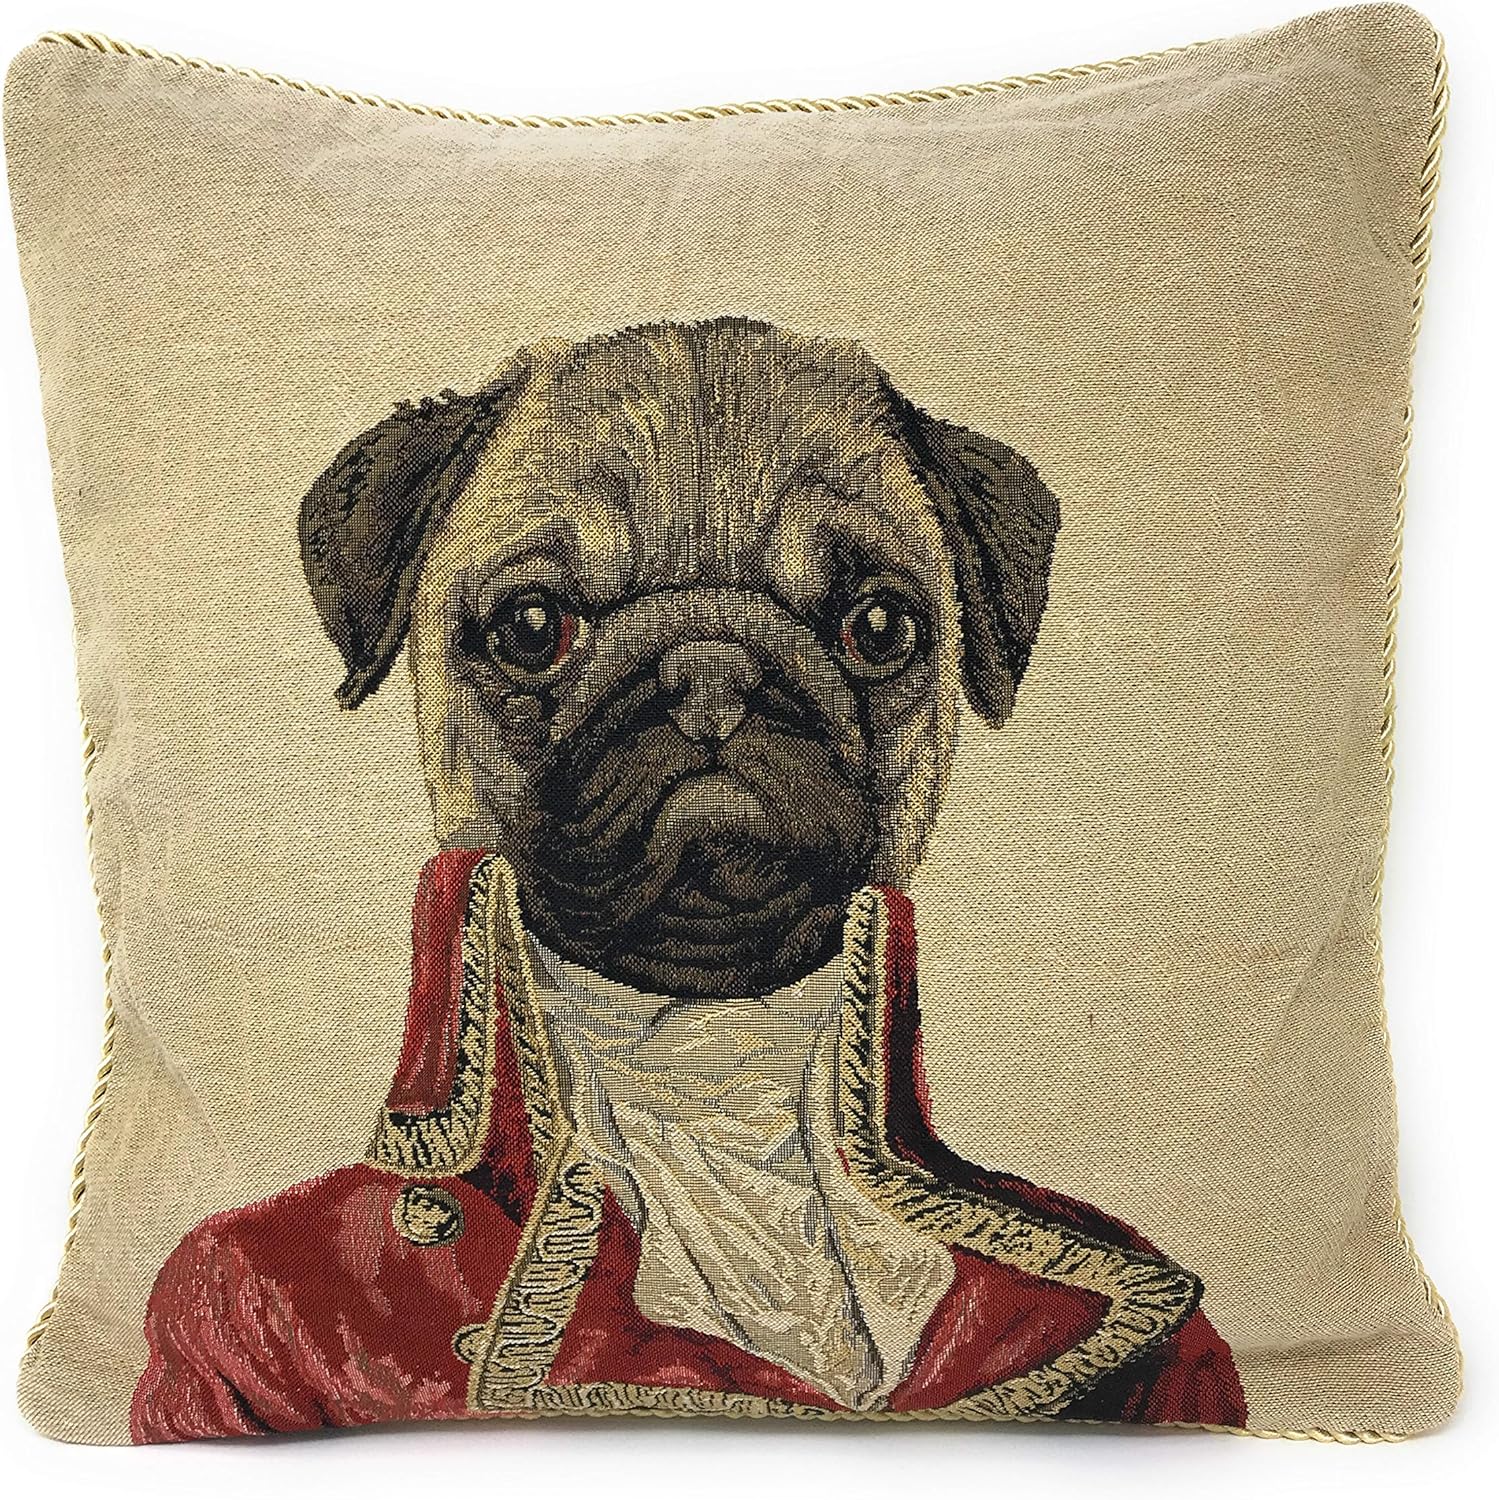 18 X 18 Inch Square French Vintage European Pug Pillow